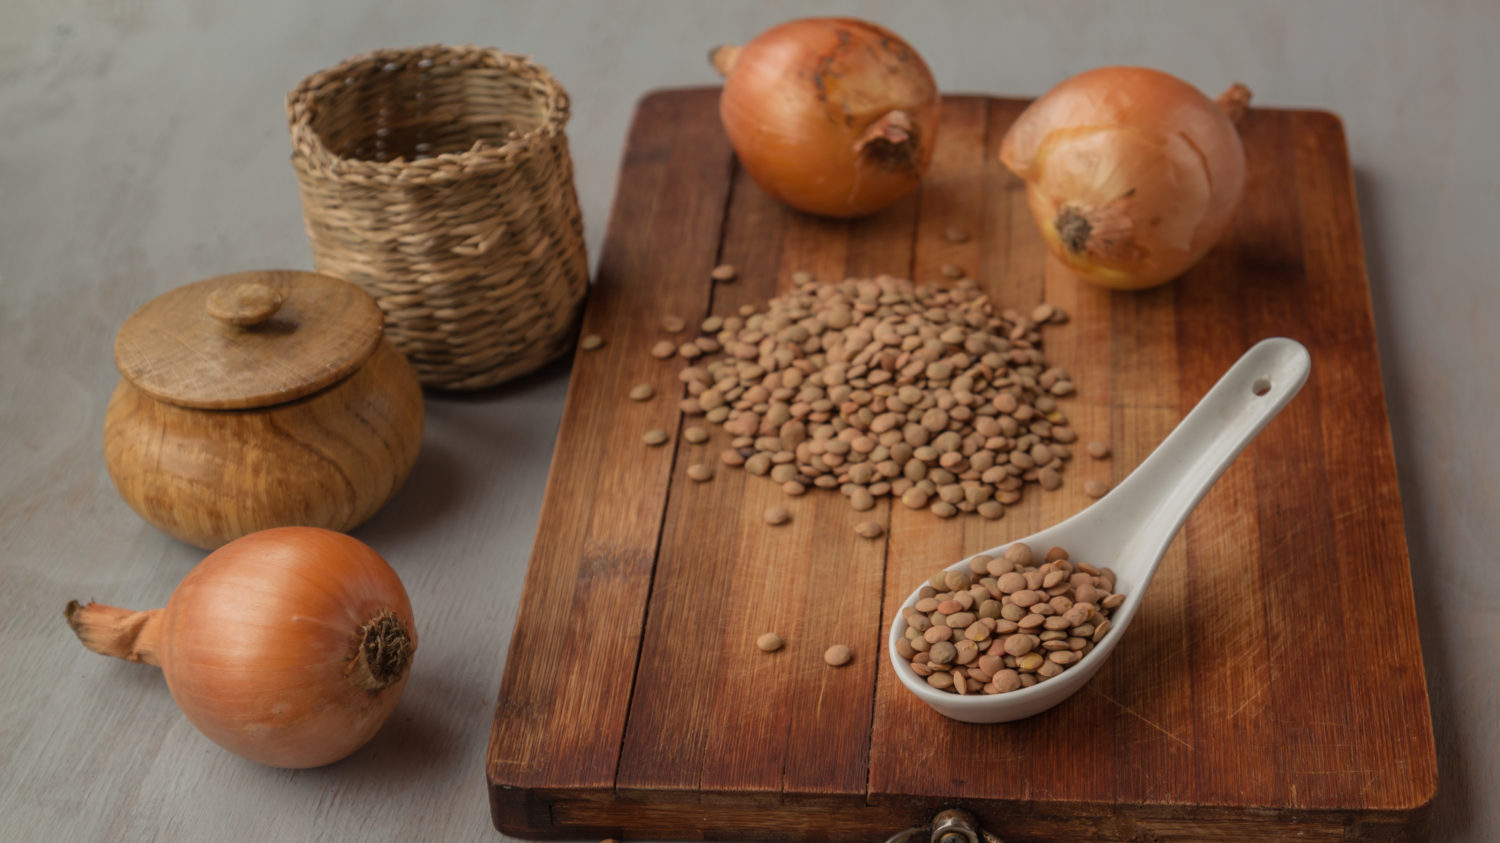 Image for Budget Cooking: Berbere Lentils & Greens